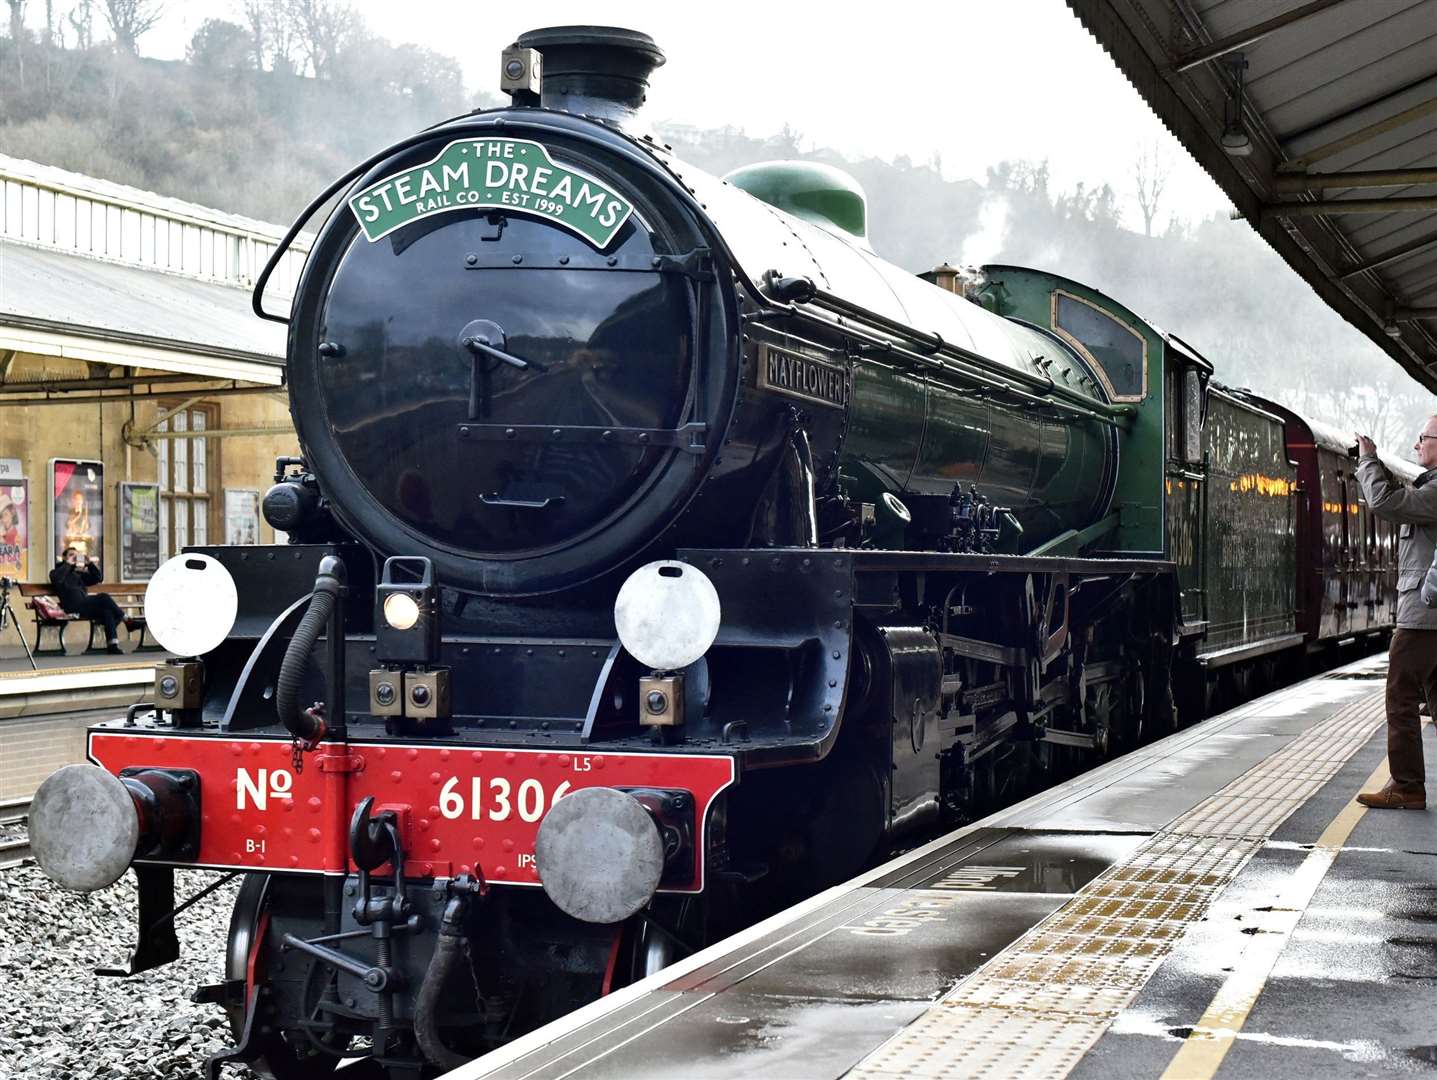 The train will depart from London Victoria and travel through Kent to Dover. Picture: Steam Dreams